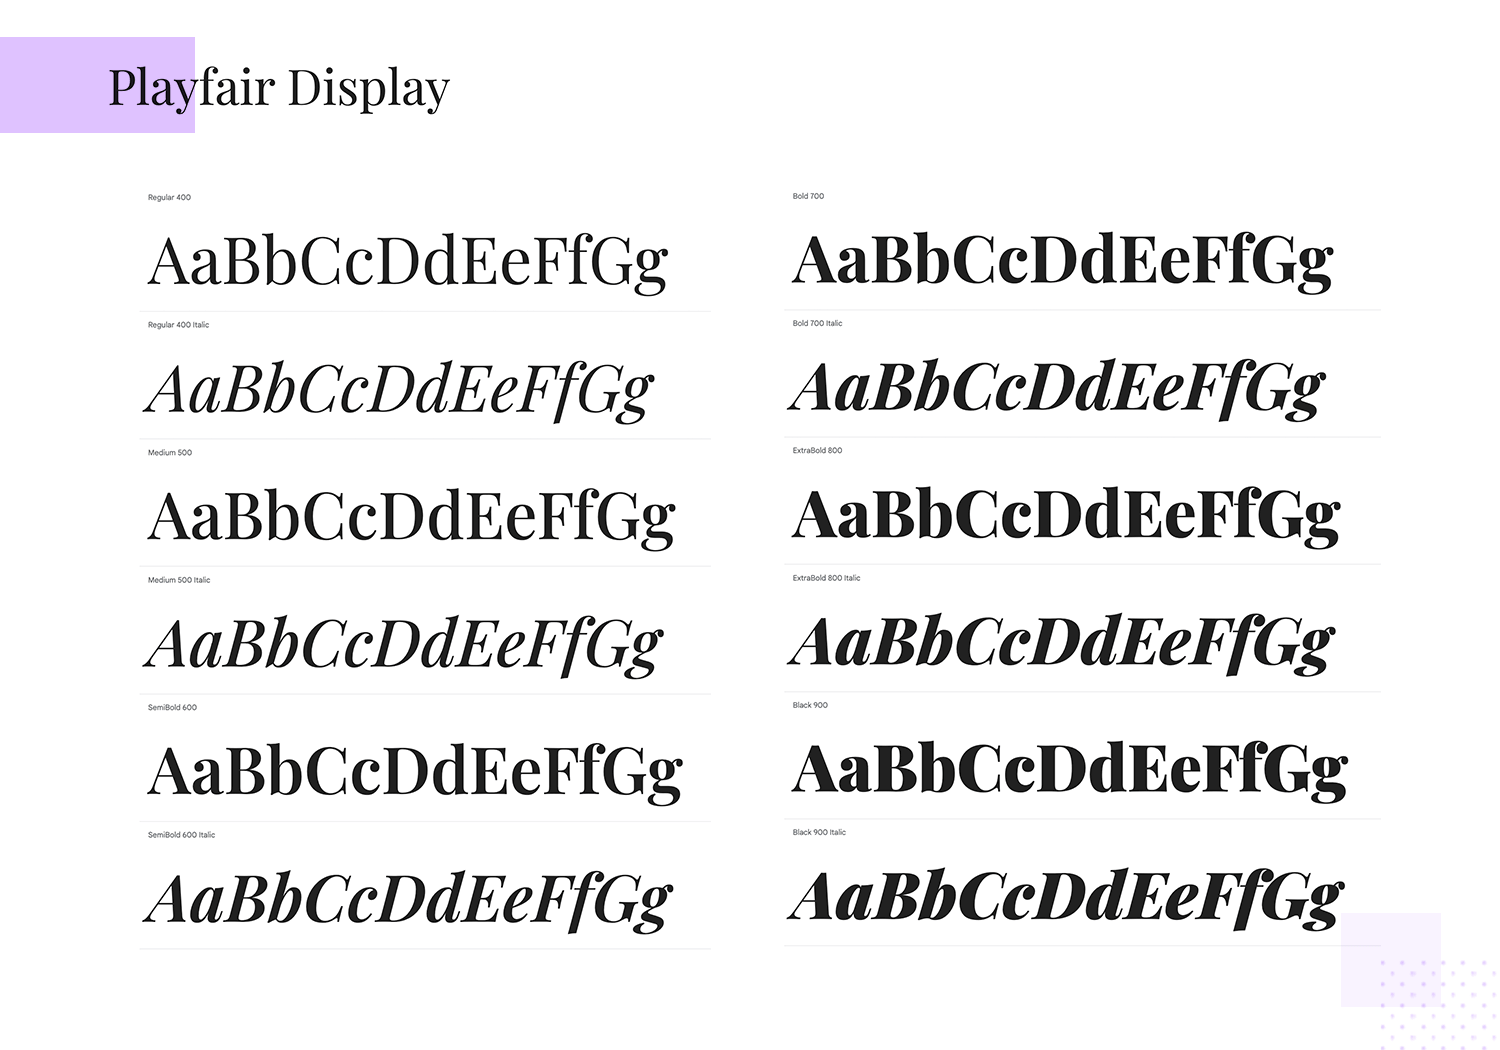 Playfair Display font showcase featuring various weights from Regular 400 to Black 900, including italic styles